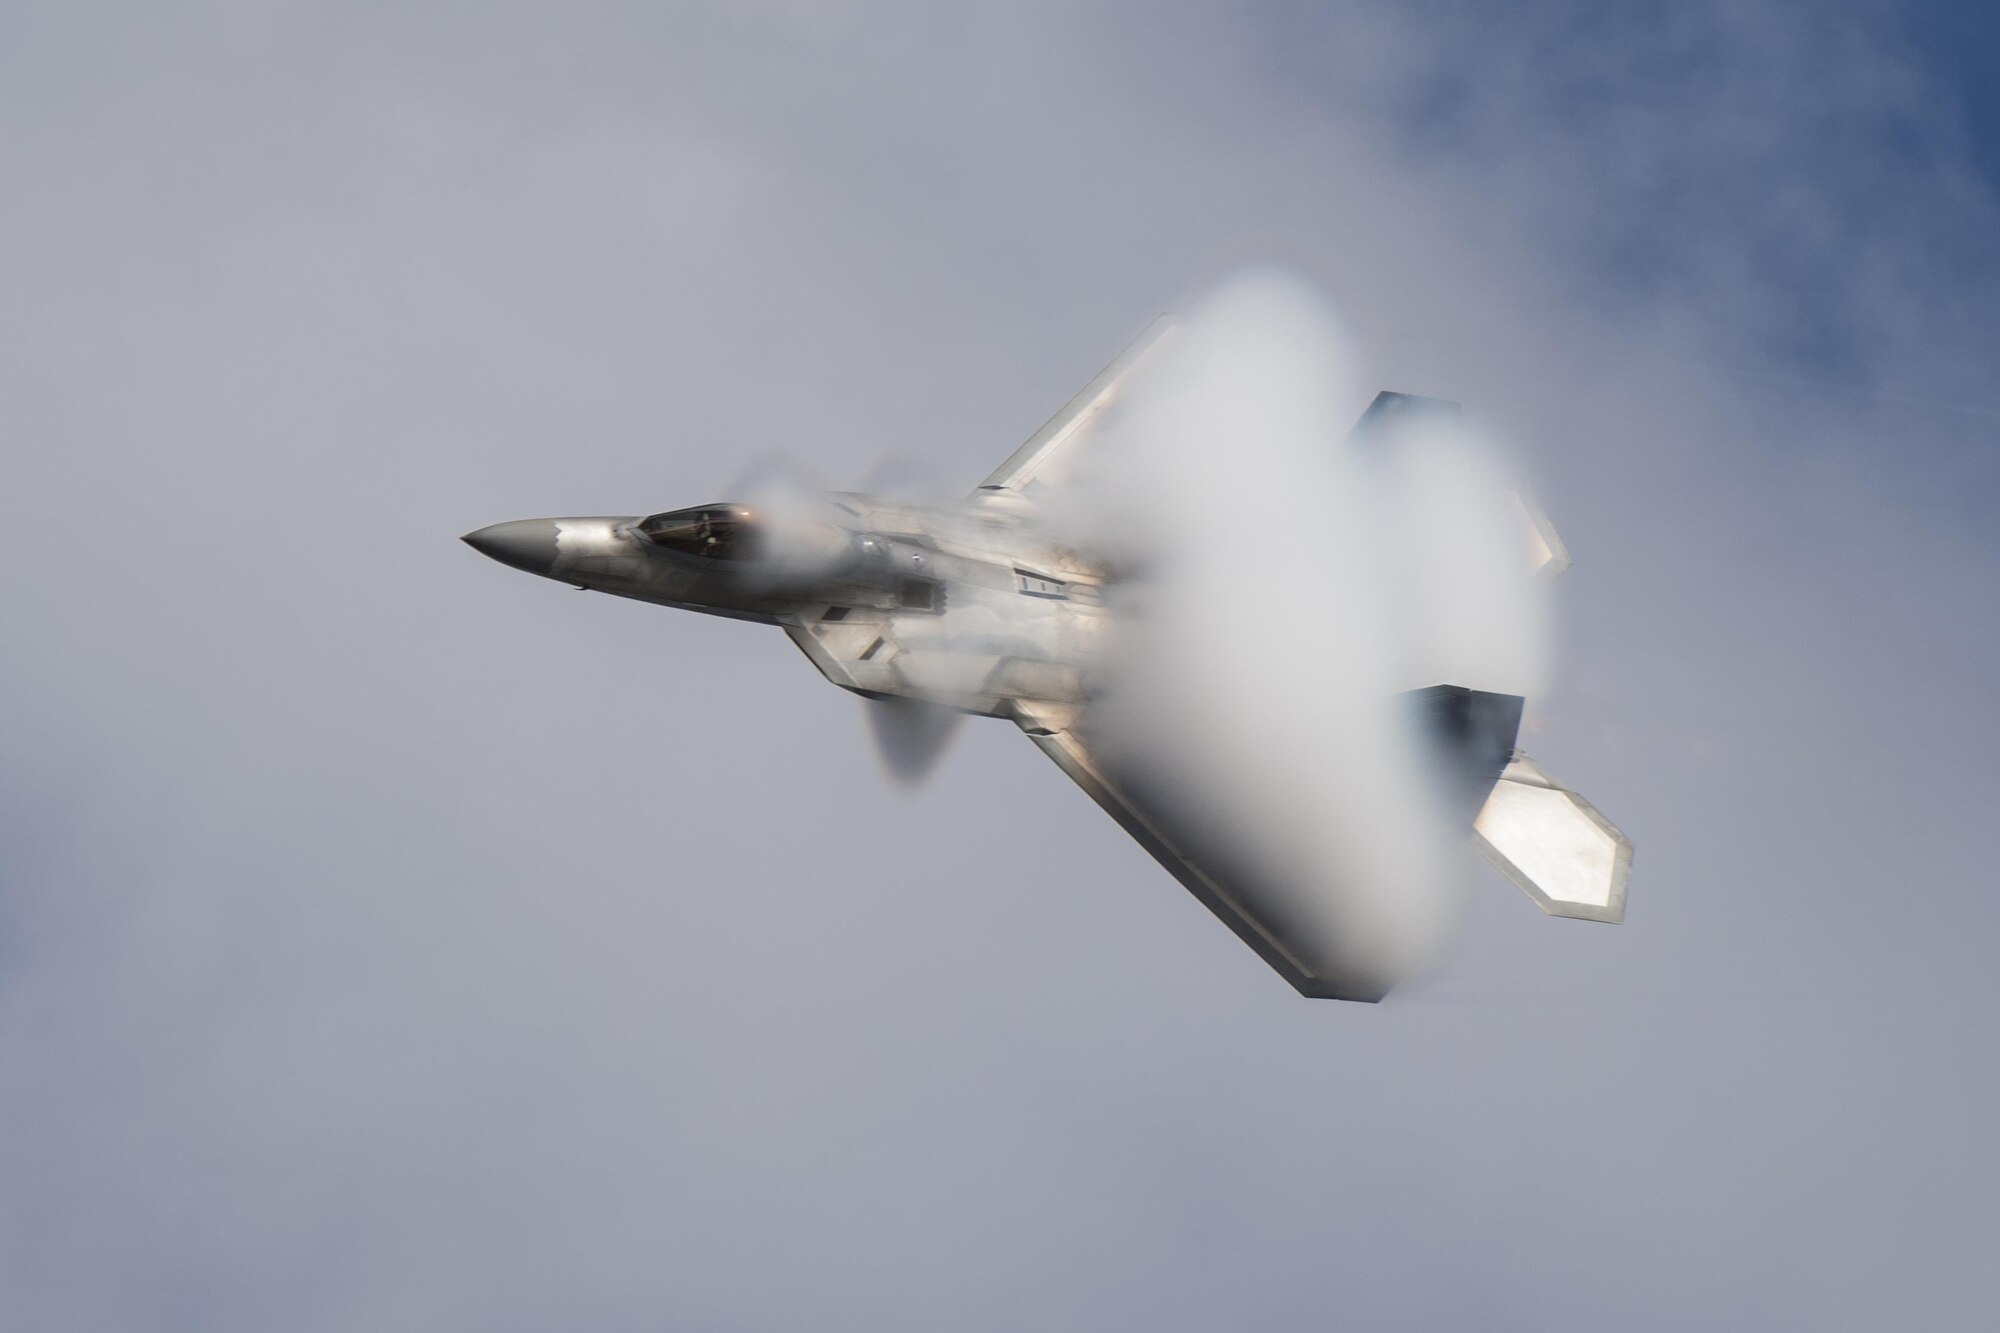 An F-22 is covered in vapors while demonstrating the capabilities of the aircraft, Nov. 5, 2017, at Naval Air Station Jacksonville, Fla. Maj. Daniel Dickinson, F-22 Raptor Demo Team pilot, performed display of capabilities before joining the Heritage Flight Formation. (U.S. Air Force photo by Staff Sgt. Eric Summers Jr.)